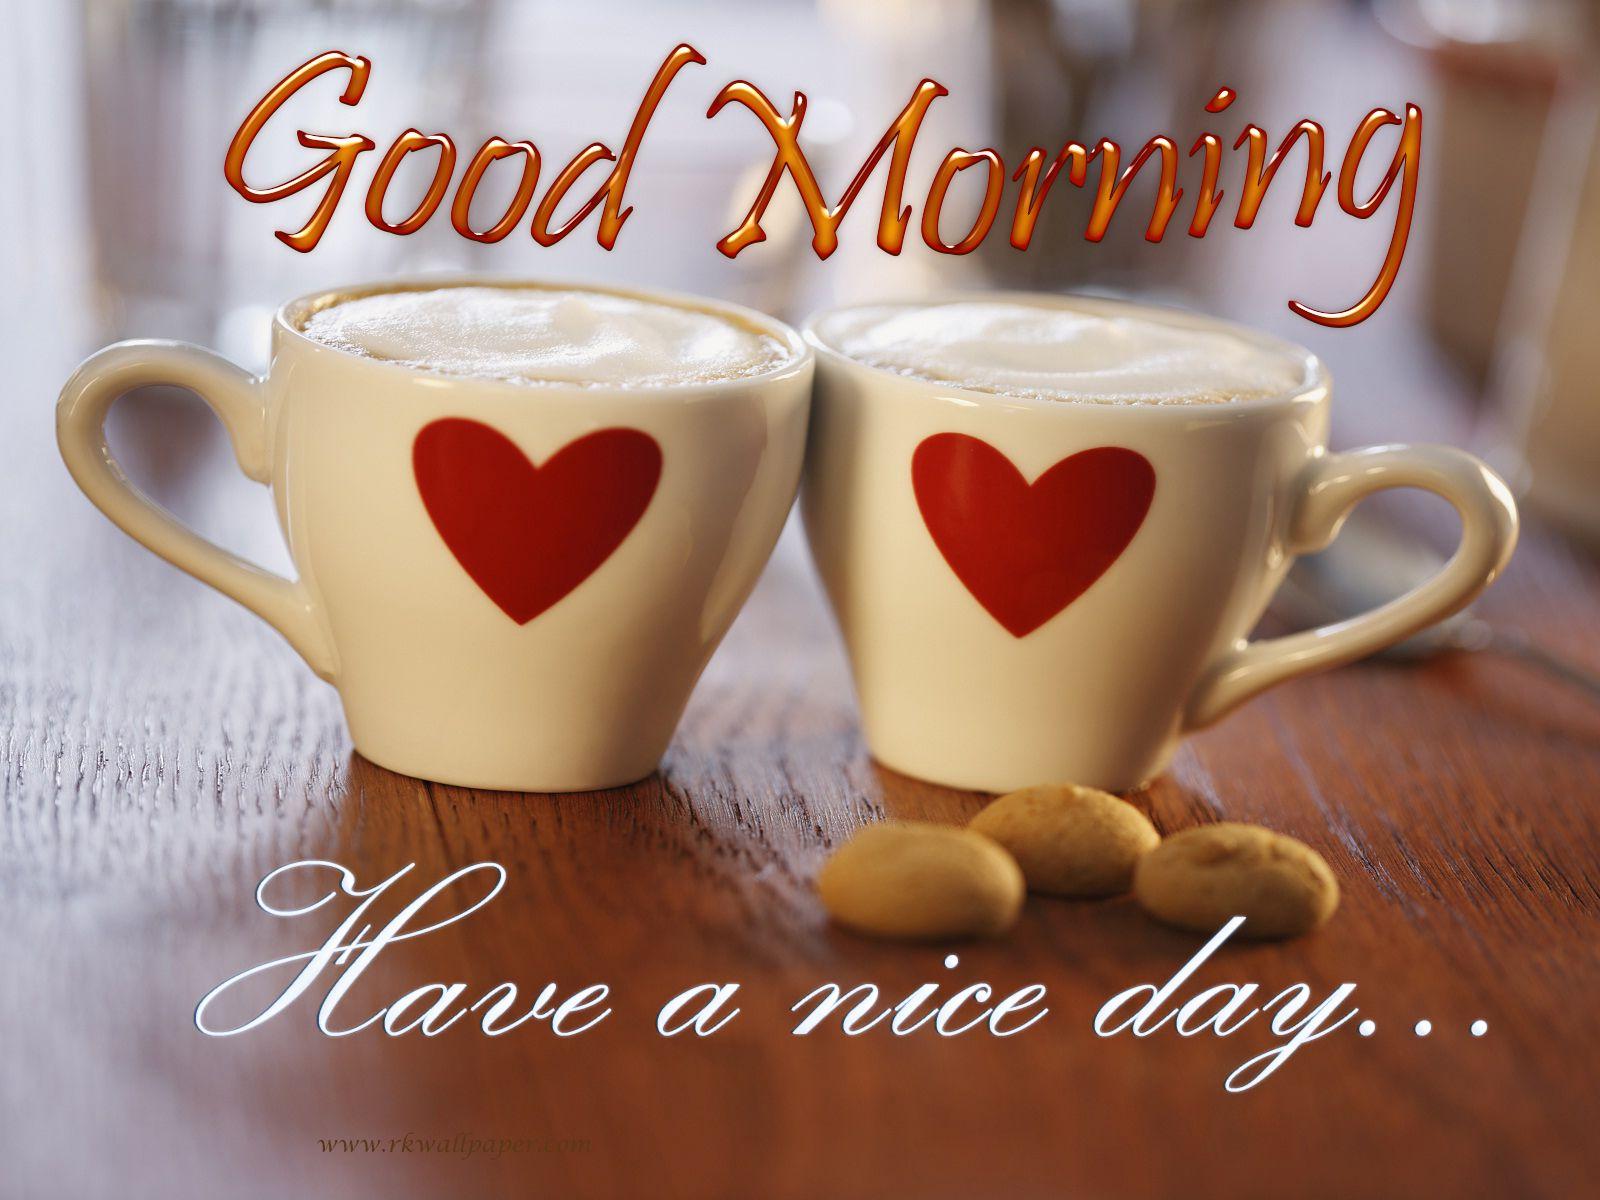 good morning have a nice day wishes wallpaper. QUOTES AND WALLPAPERS